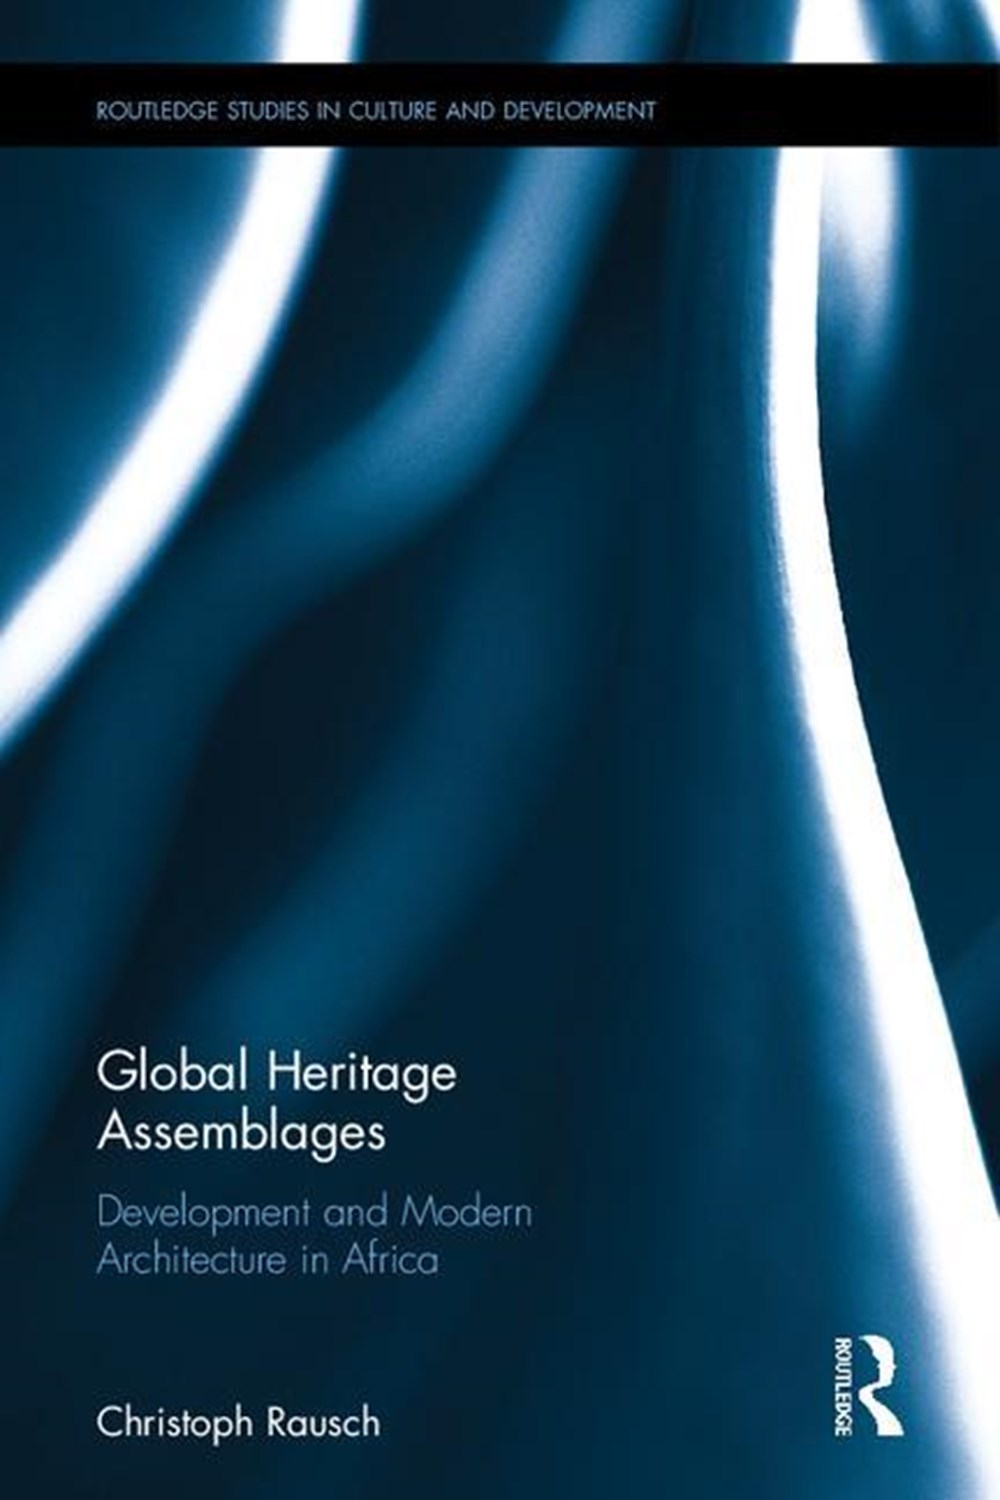 Global Heritage Assemblages: Development and Modern Architecture in Africa